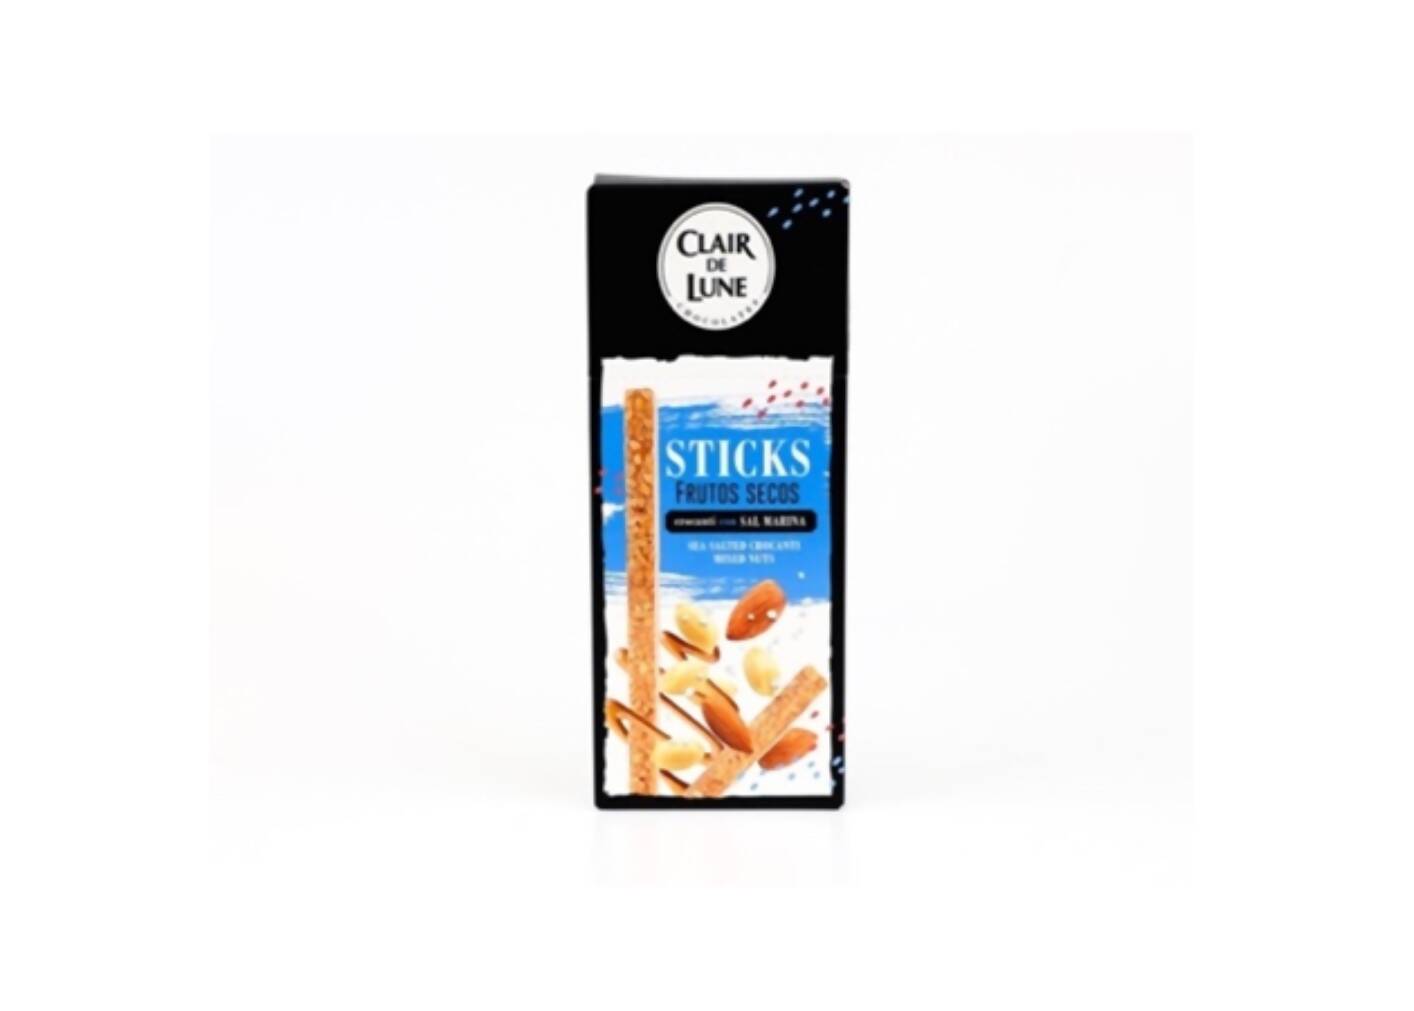 STICK SEA SALTED CROANTI MIXED NUTS - CLAIR DE LUNE